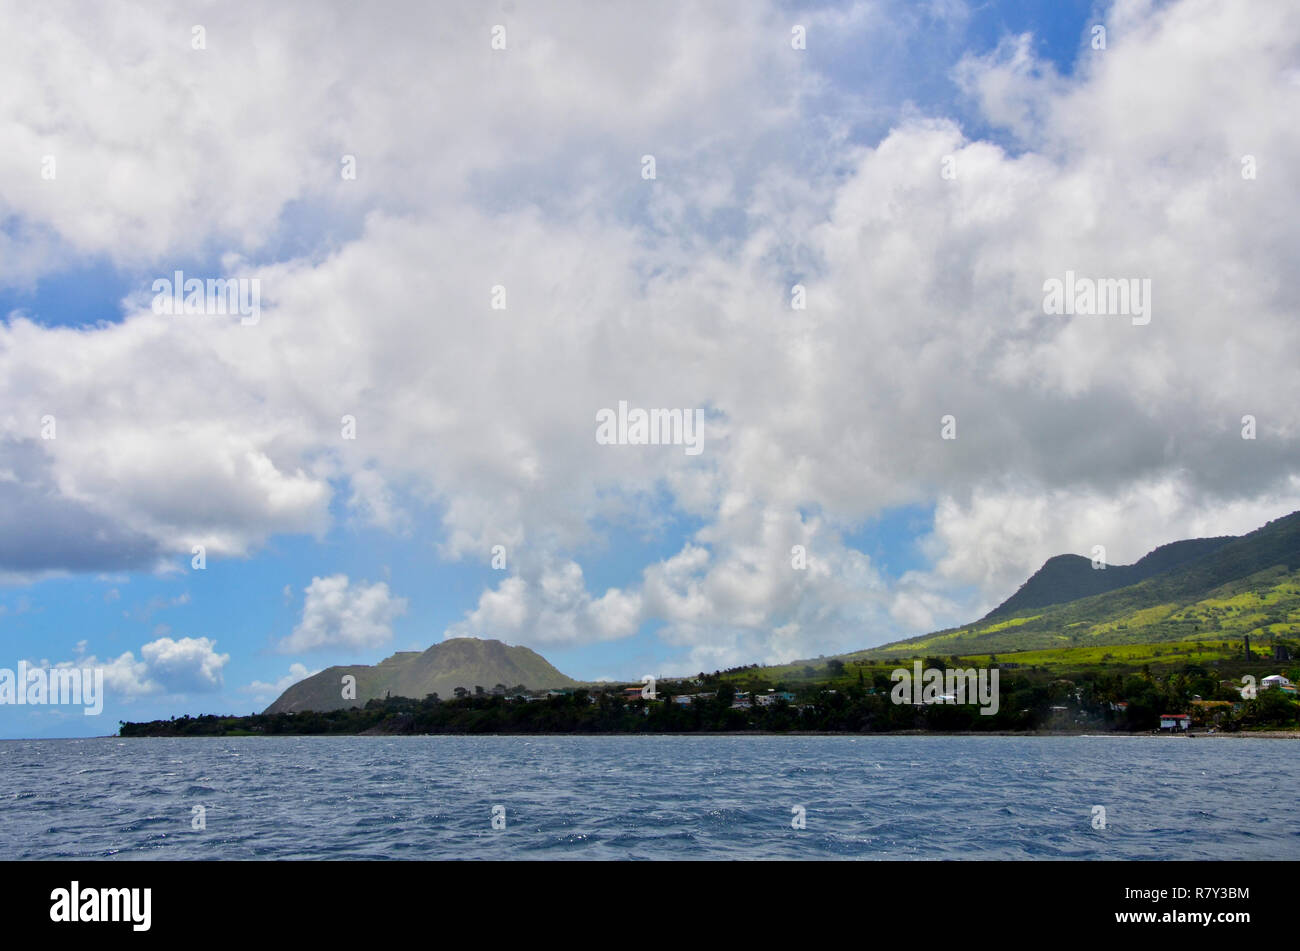 The view of Brimstone Hill Fortress National Park in St. Kitts from the ocean Stock Photo